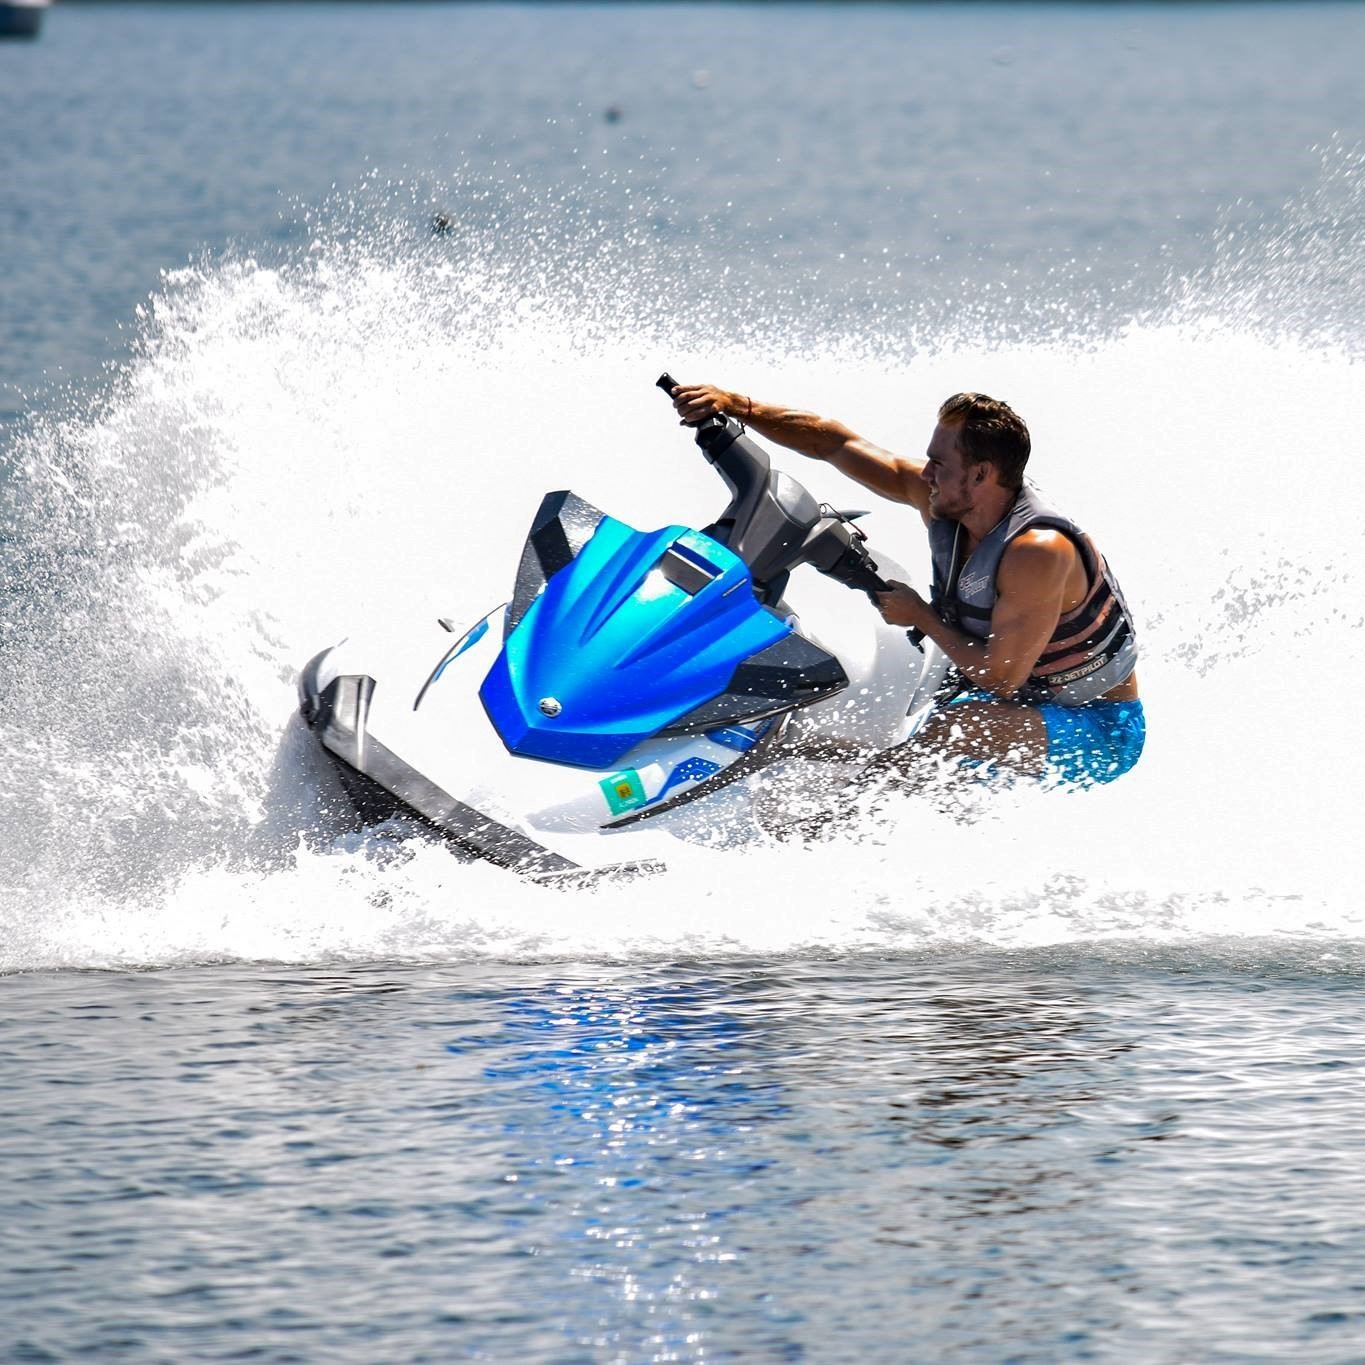 Jet Ski & Boat Rentals in Tampa Bay - #1 Watersports Attraction!